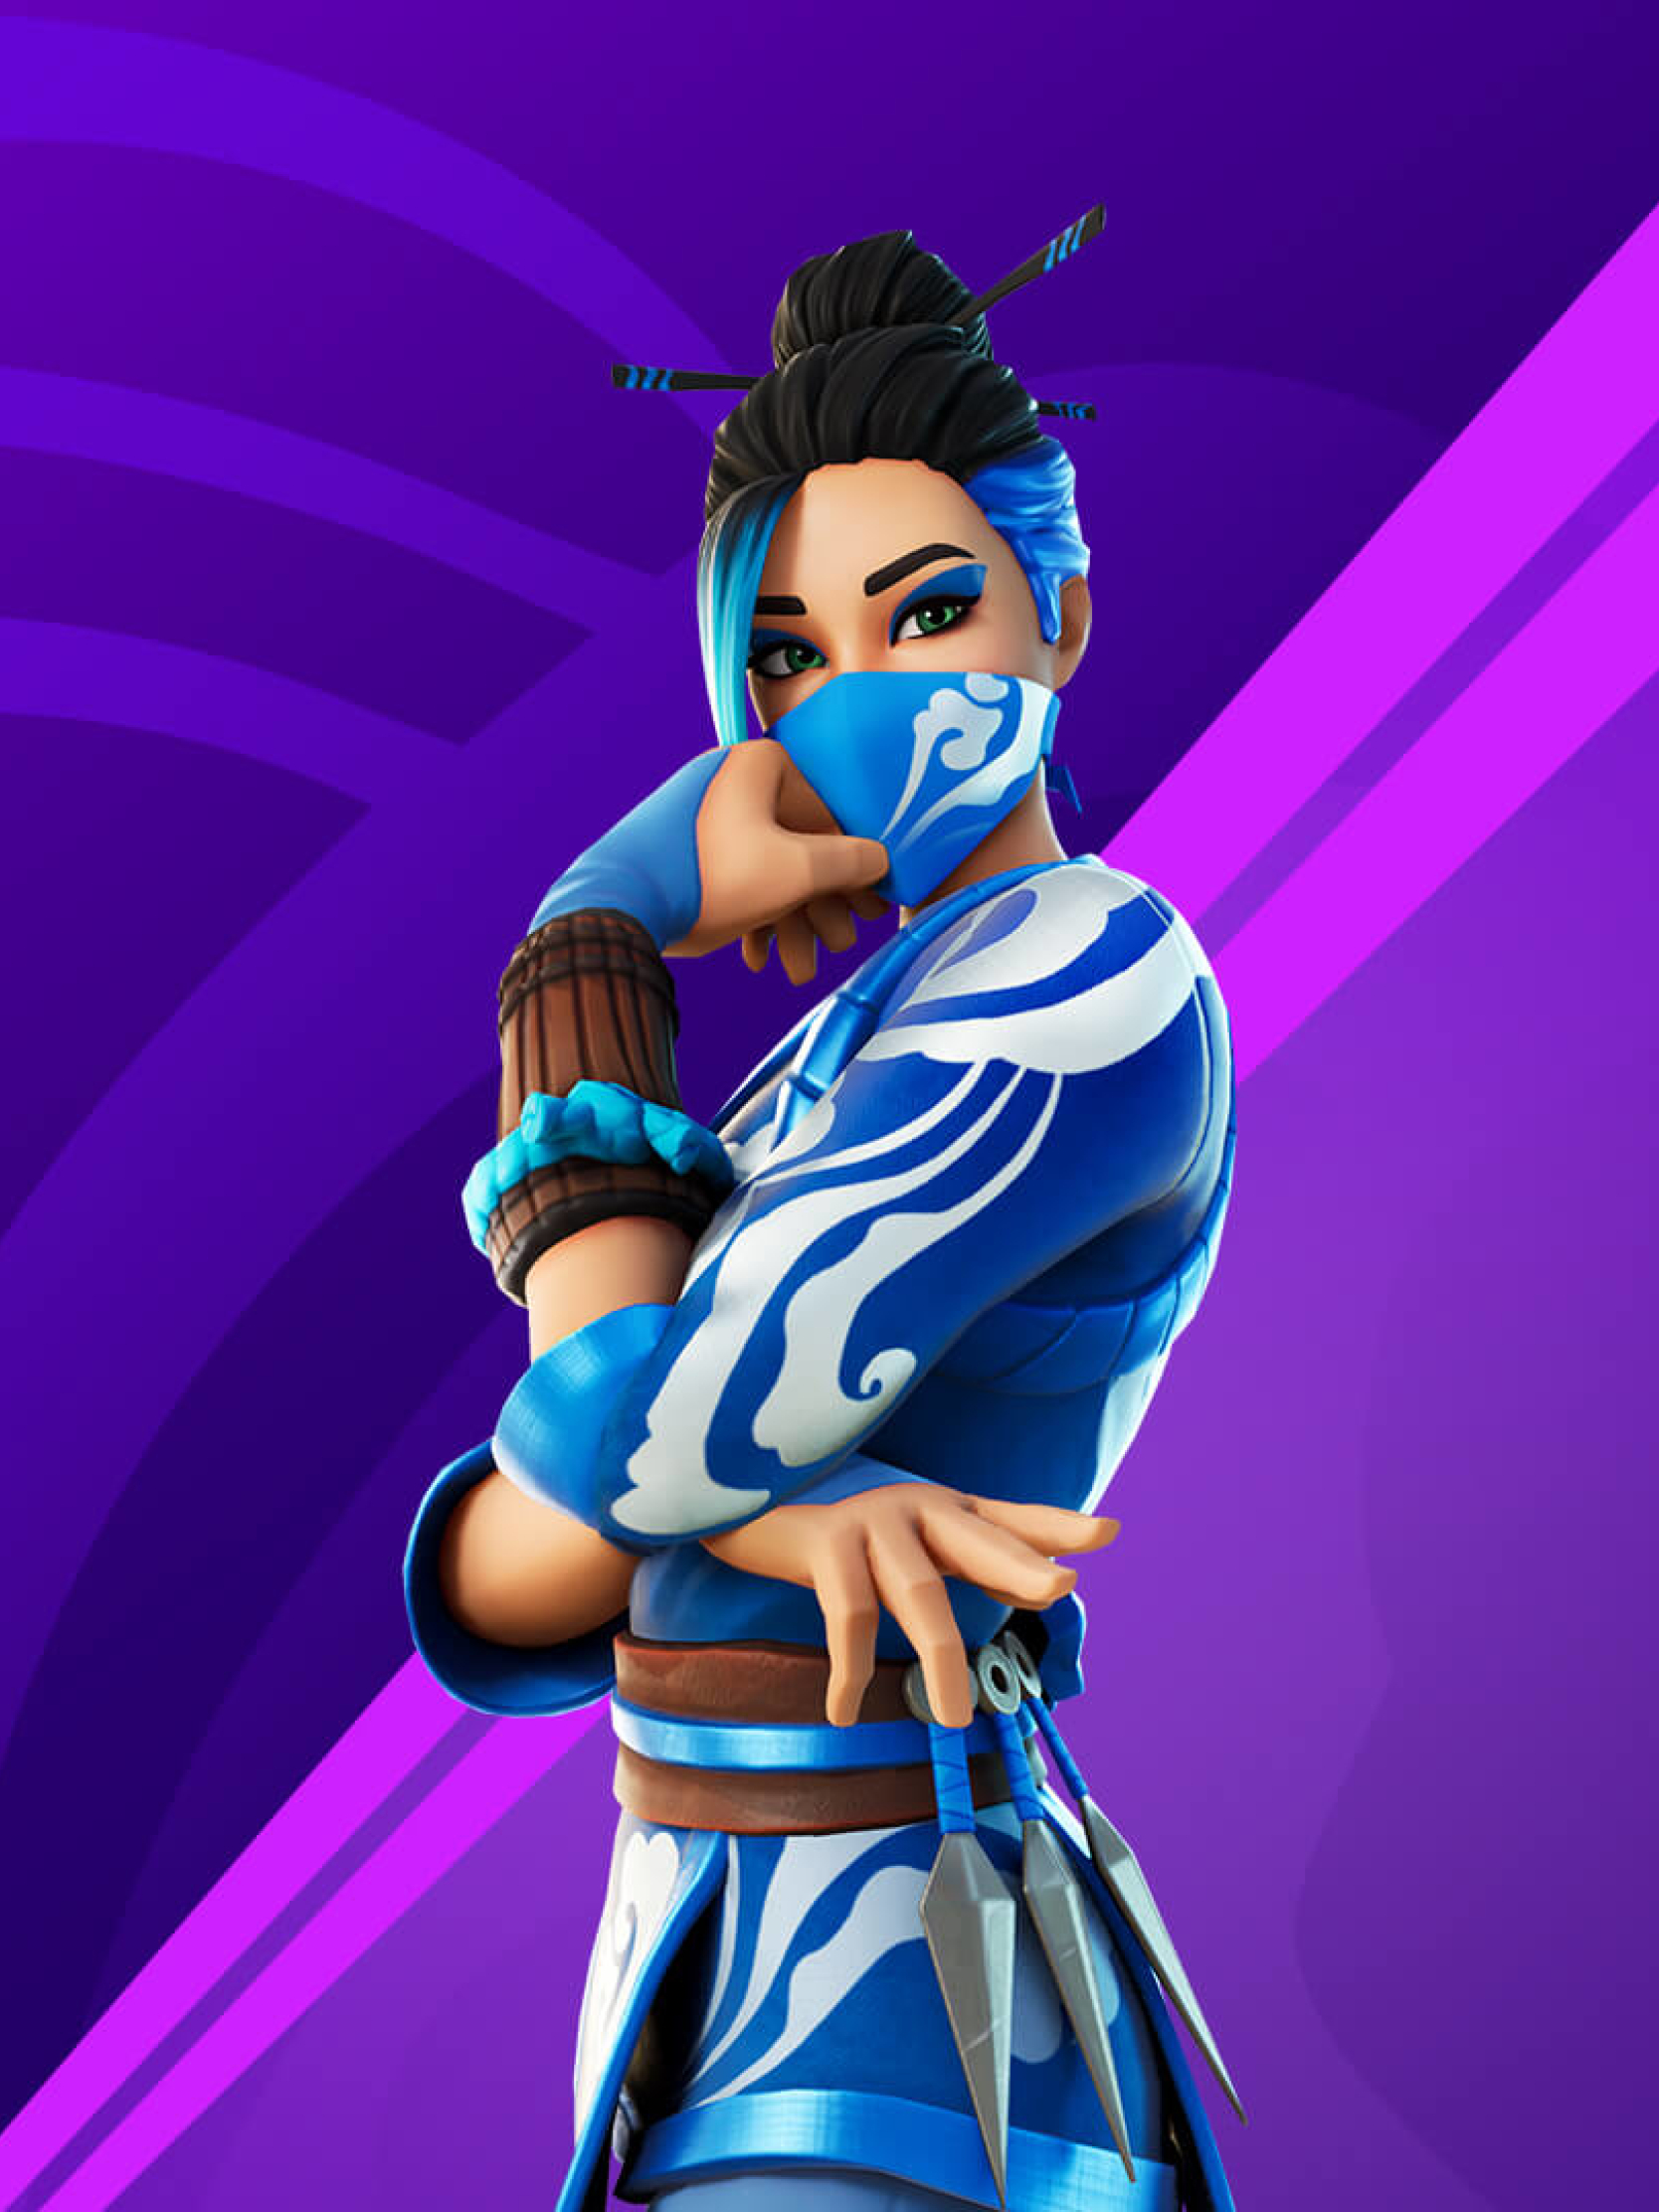 1668x2224 Fortnite Red Jade 1668x2224 Resolution Wallpaper Hd Games 4k Wallpapers Images Photos And Background Wallpapers Den